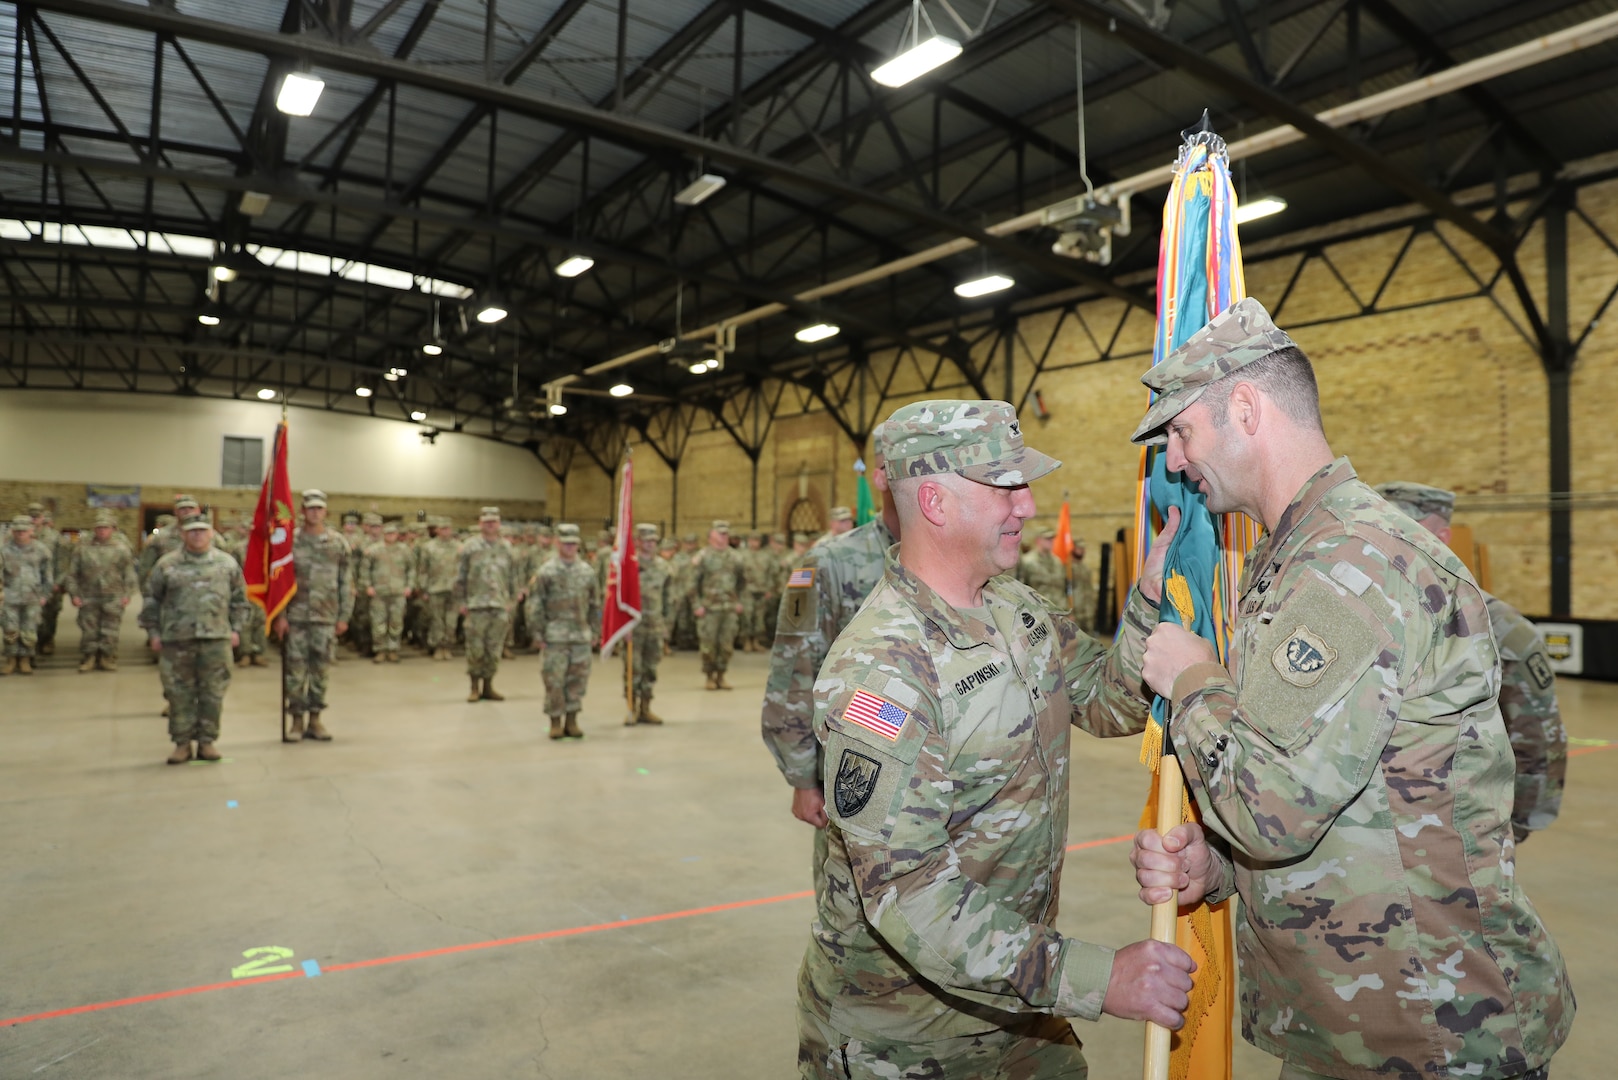 Col. Paul Gapinski receives the colors of the 157th Maneuver Enhancement Brigade from Brig. Gen. Matthew Strub, Wisconsin’s deputy adjutant general for Army, during a formal change of command ceremony Nov. 4 at the Richards Street Armory, Milwaukee. The passing of the colors is symbolic of the responsibility of the unit passing from one commander to the next. Gapinski follows Col. Eric Leckel, who most recently led the brigade headquarters on a deployment to the Horn of Africa. Wisconsin National Guard photo by Sgt. 1st Class Katie Theusch